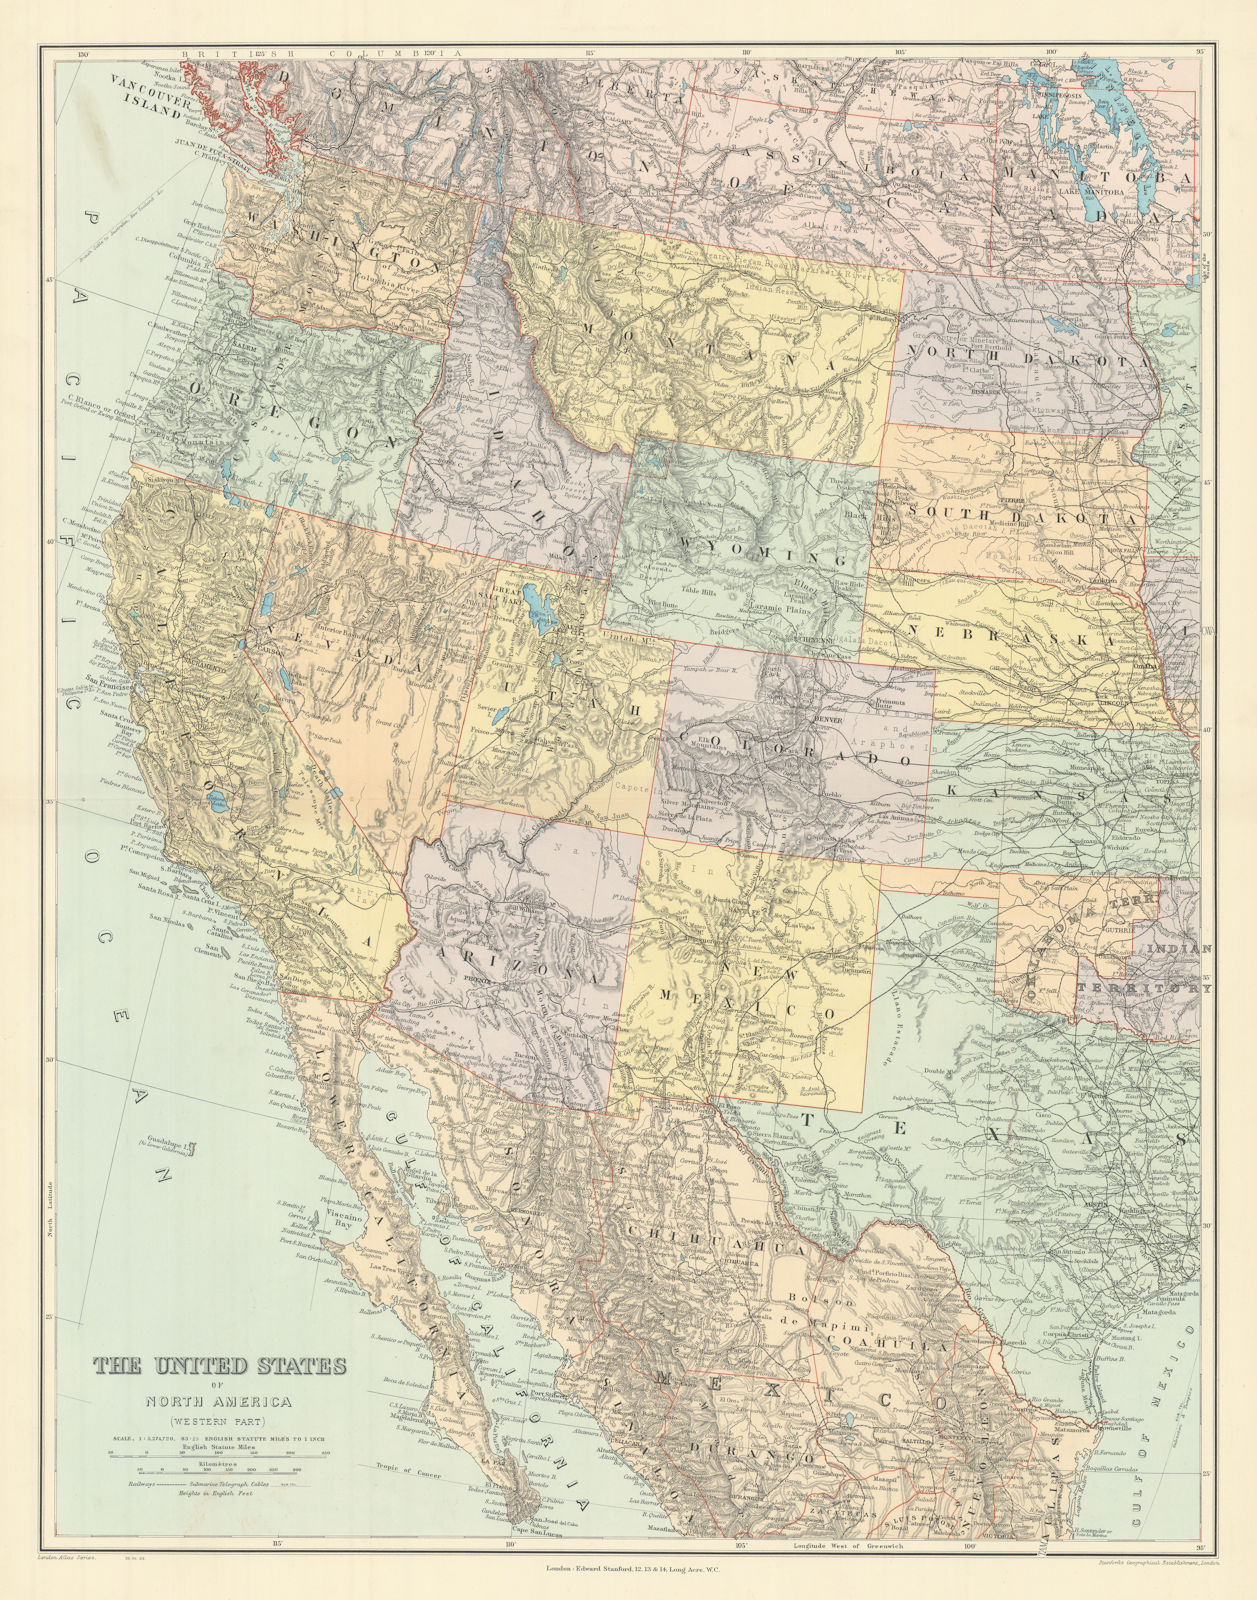 Associate Product The United States of North America, Western part. USA. 69x54cm STANFORD 1904 map